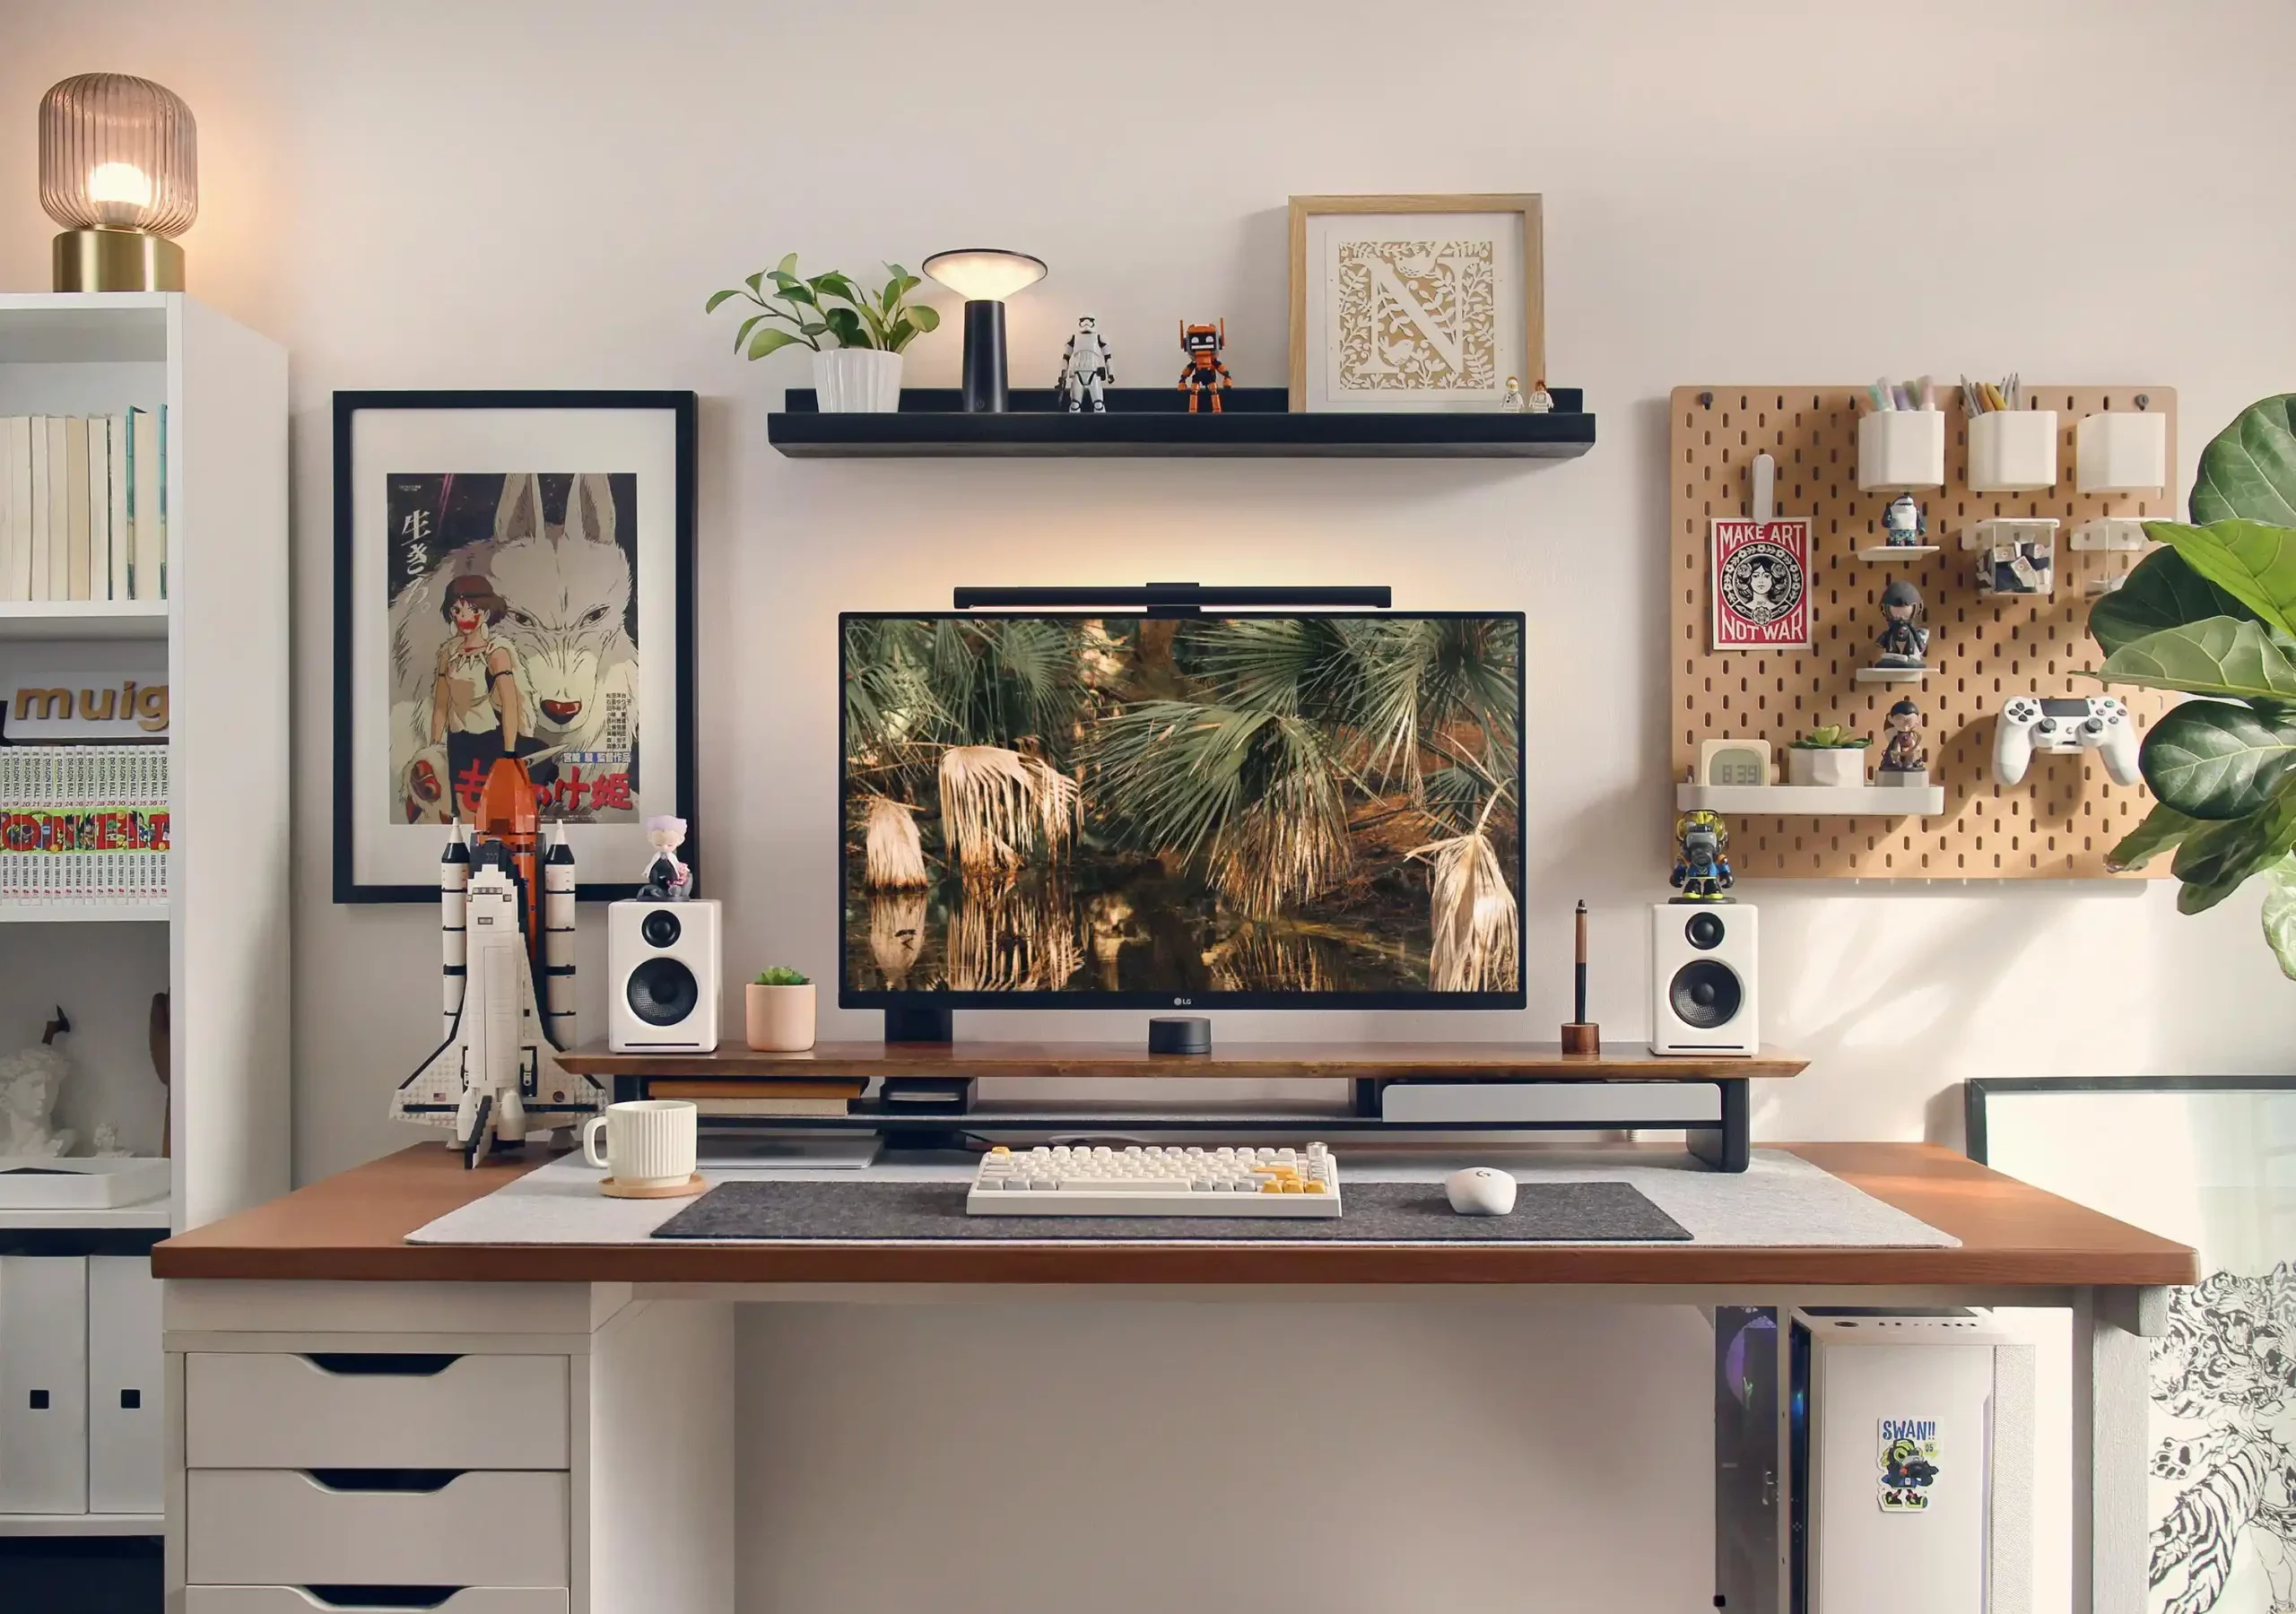 Stylish workspace setup with a desk featuring a computer monitor, various decorations, and a framed poster from the movie 'Princess Mononoke' on the wall.